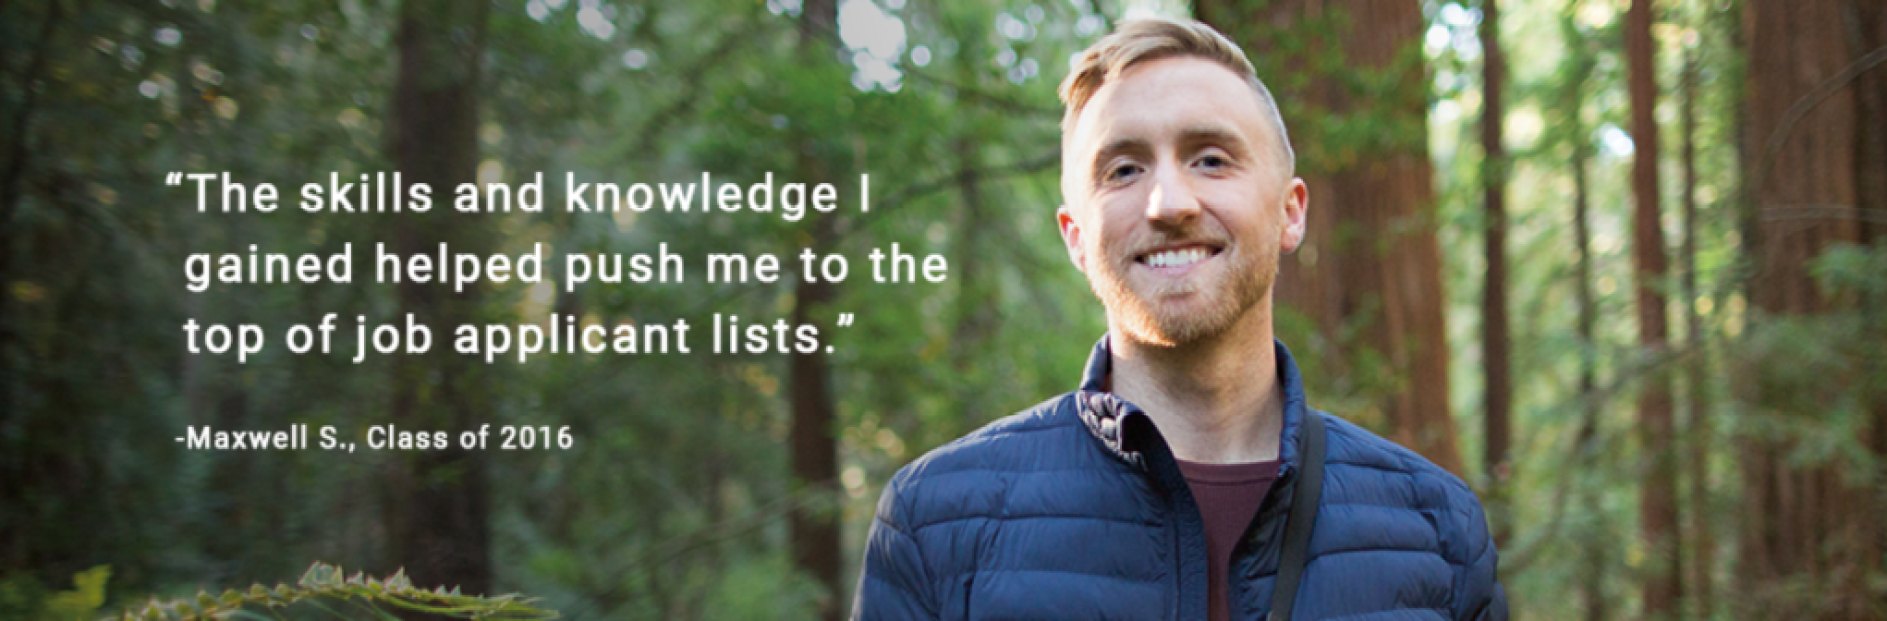 Maxwell (Alumni) stands in a forest with a quote next to him that says, " The skills and knowledge I gained helped push me to the top of job applicant lists." - Maxwell S, Class or 2016